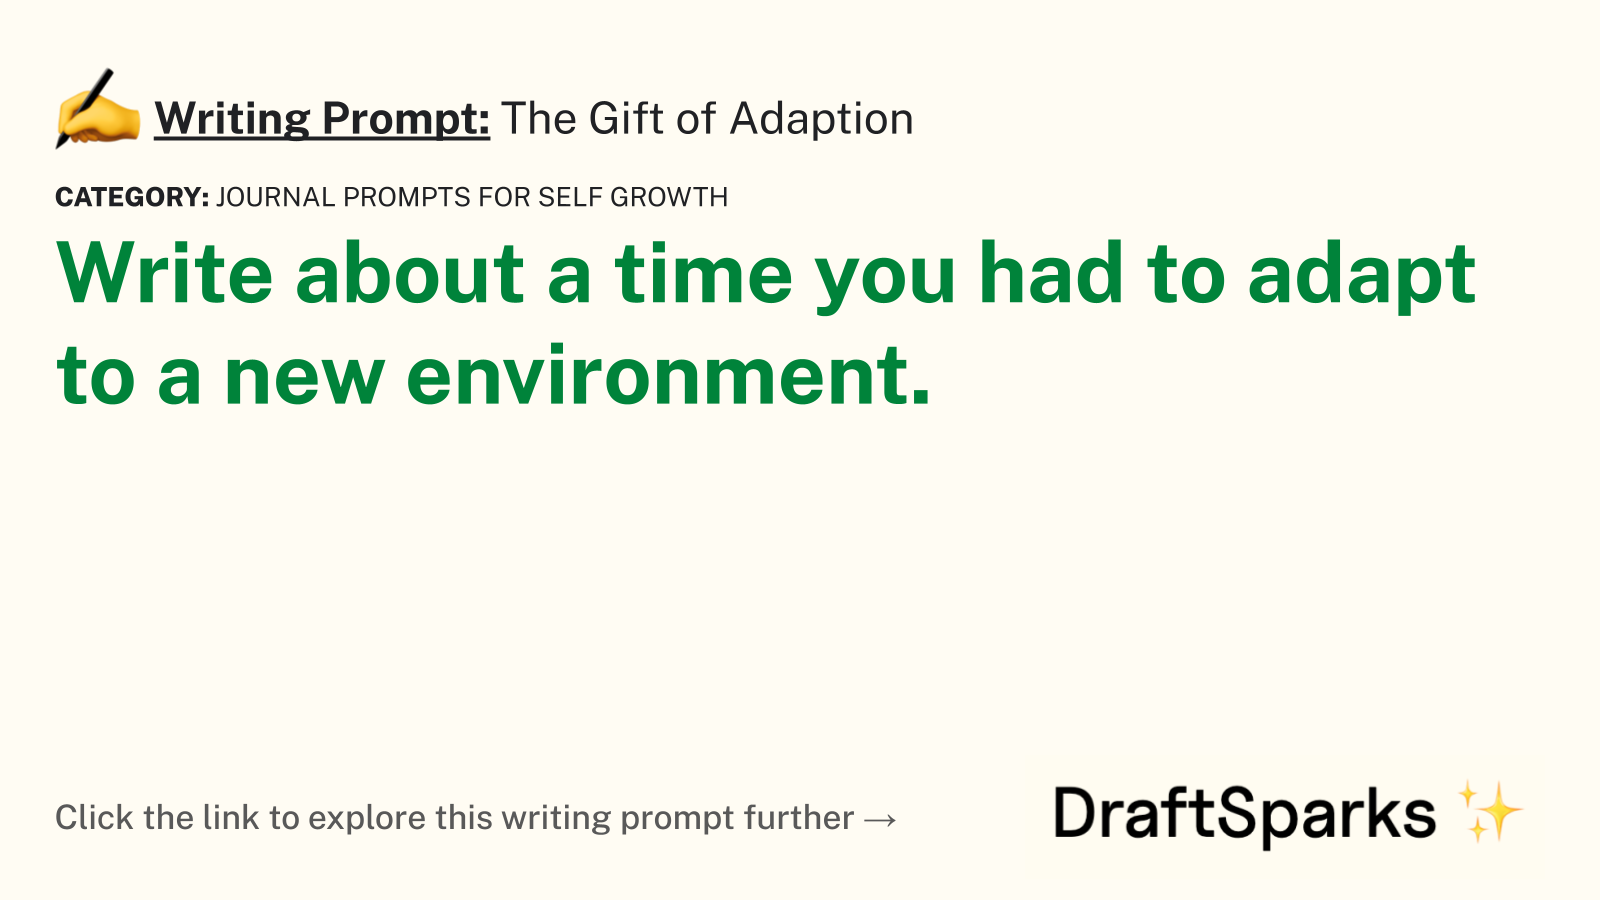 The Gift of Adaption